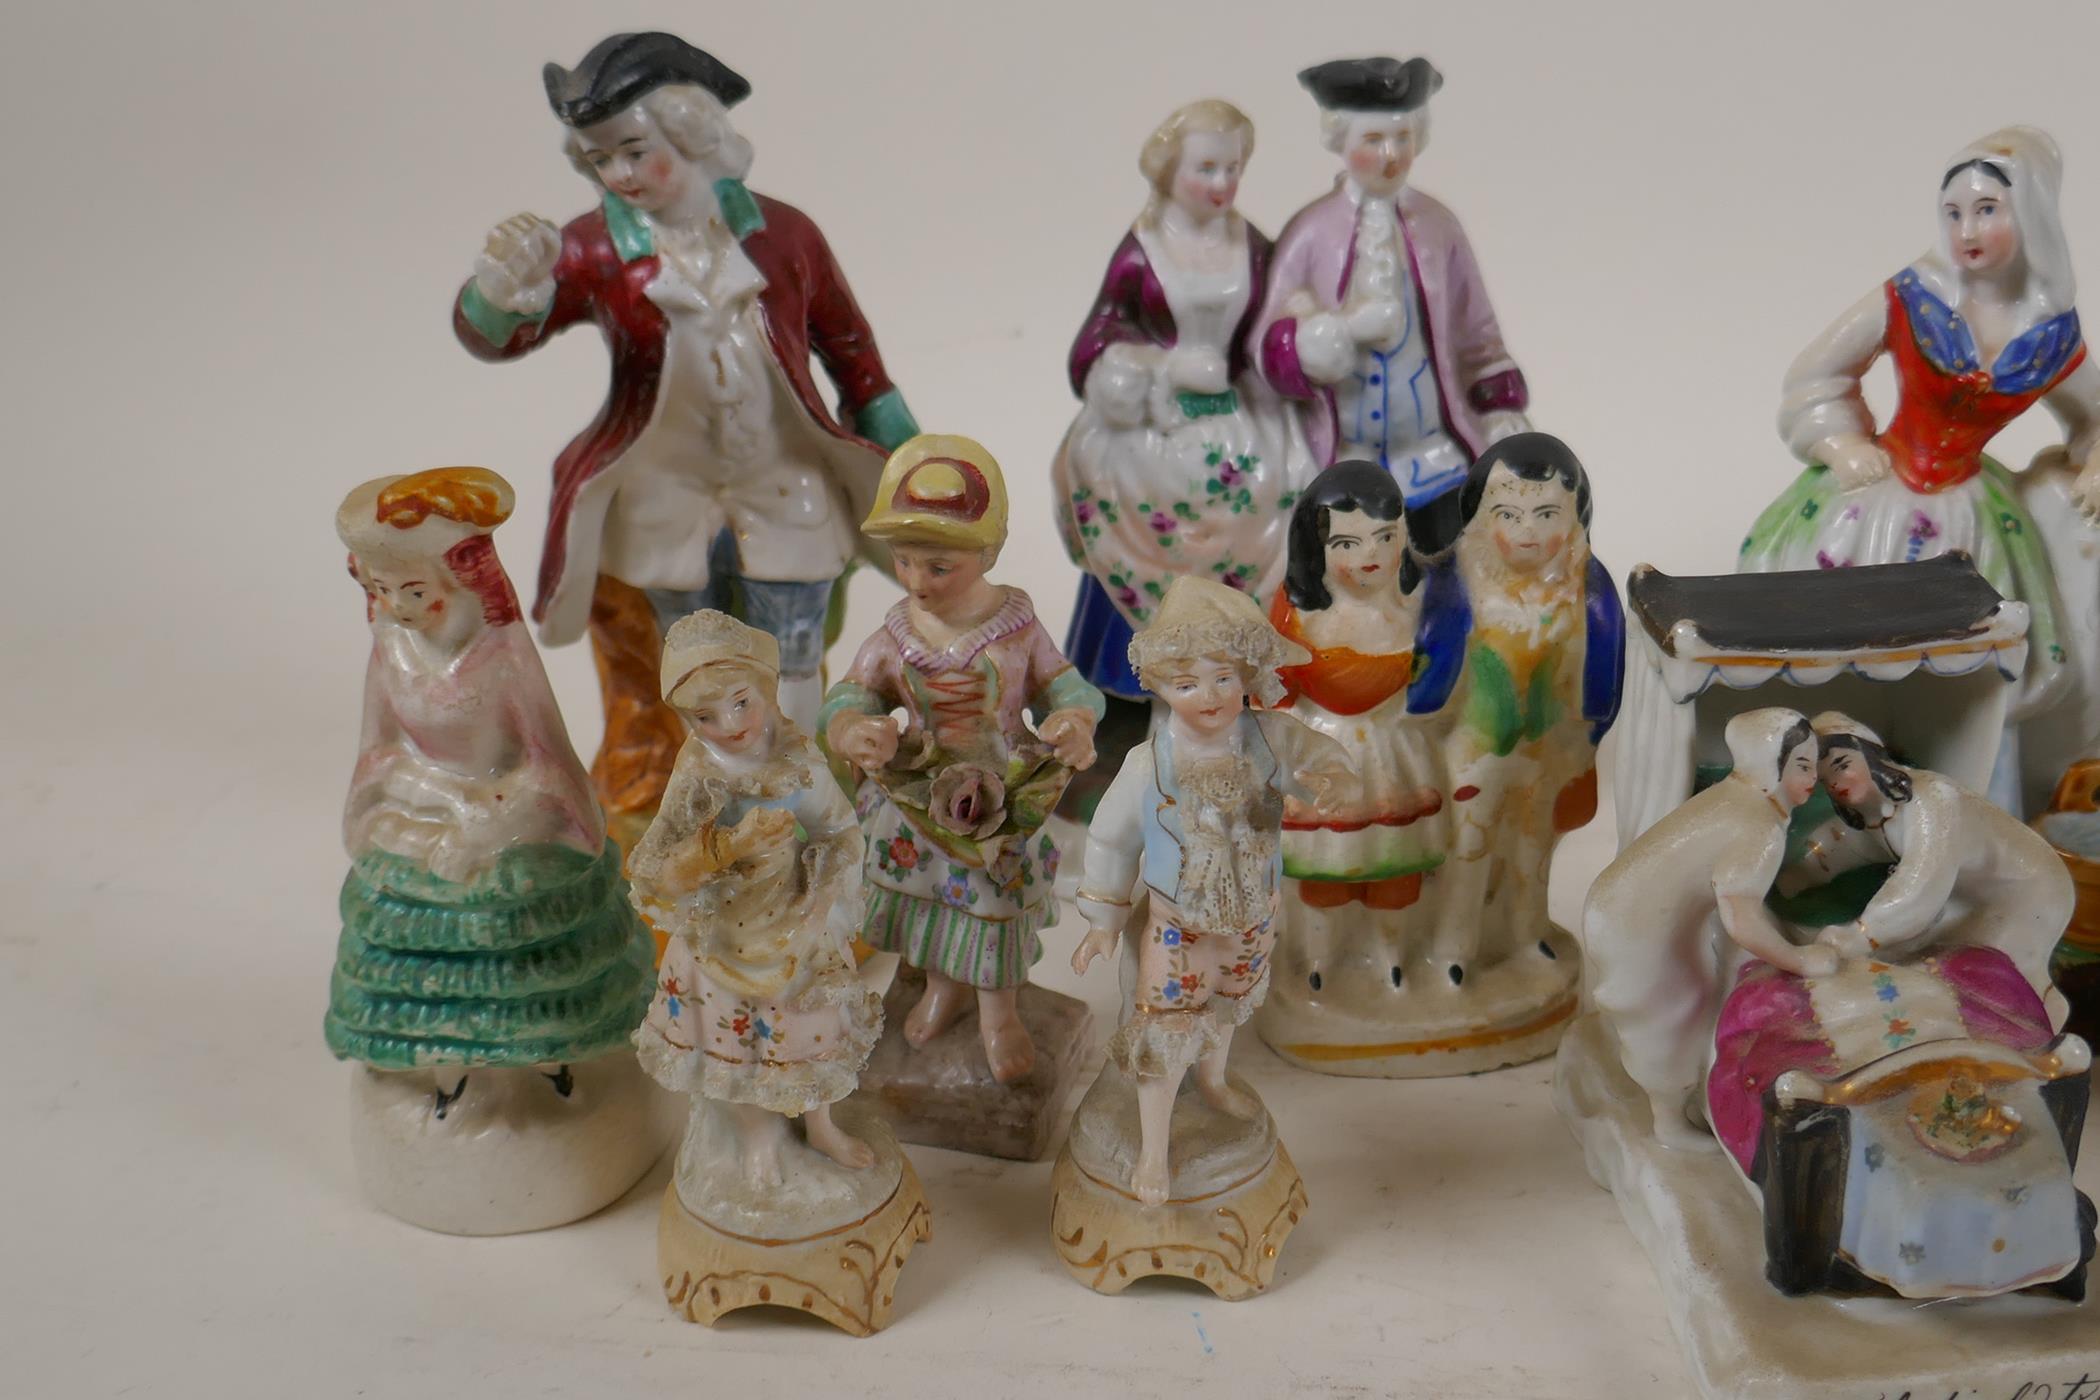 Eleven C19th continental porcelain figurines including groups and a fairing, largest 5½" - Image 6 of 6